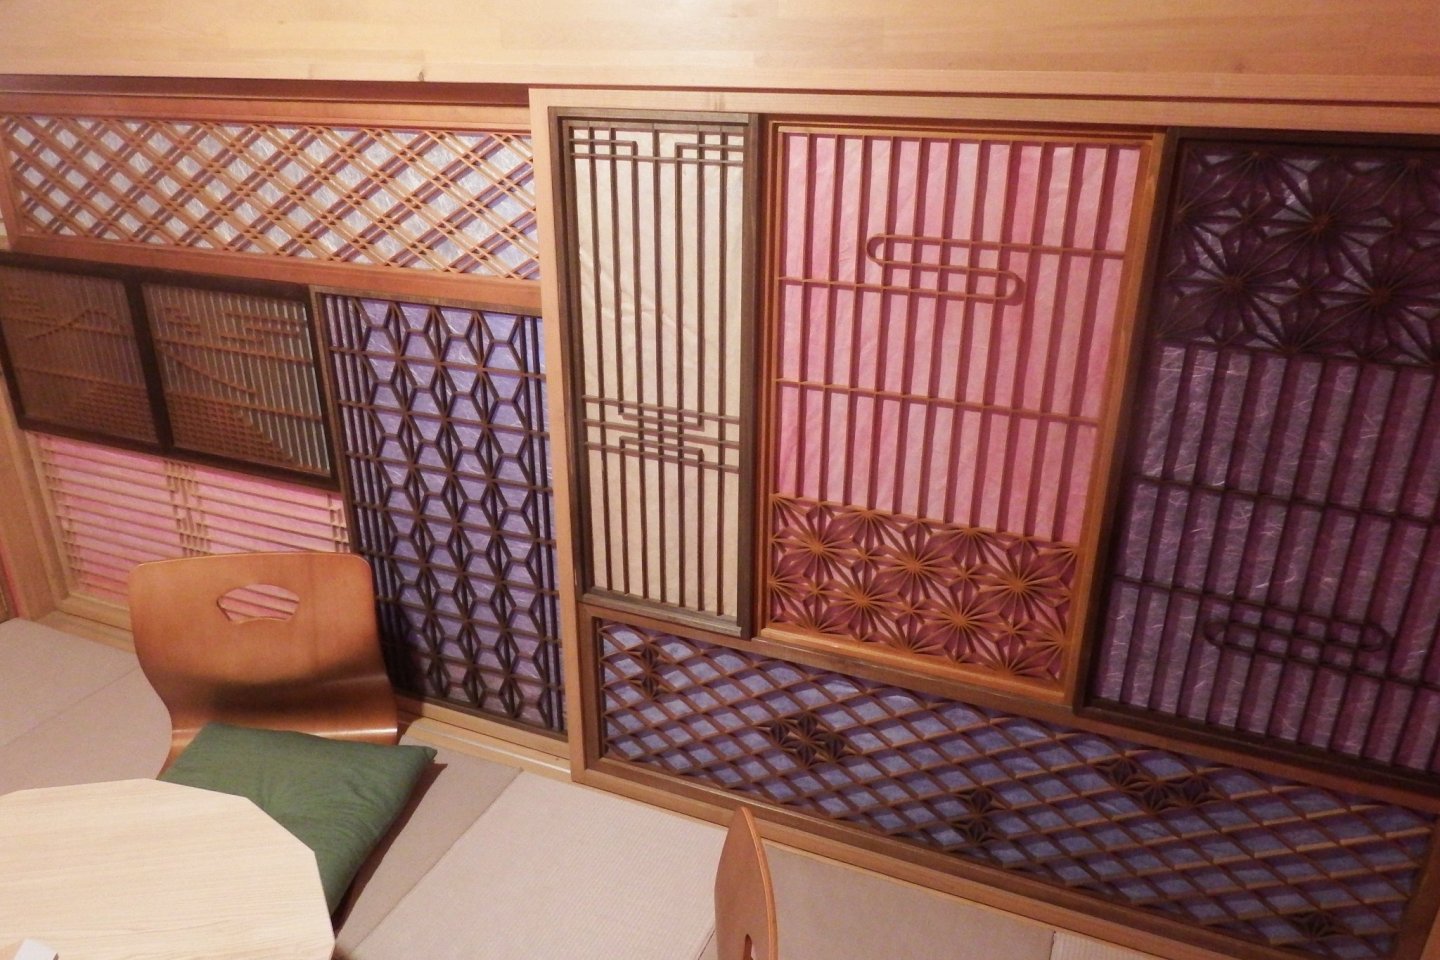 The washi doors open up to the bottom beds.